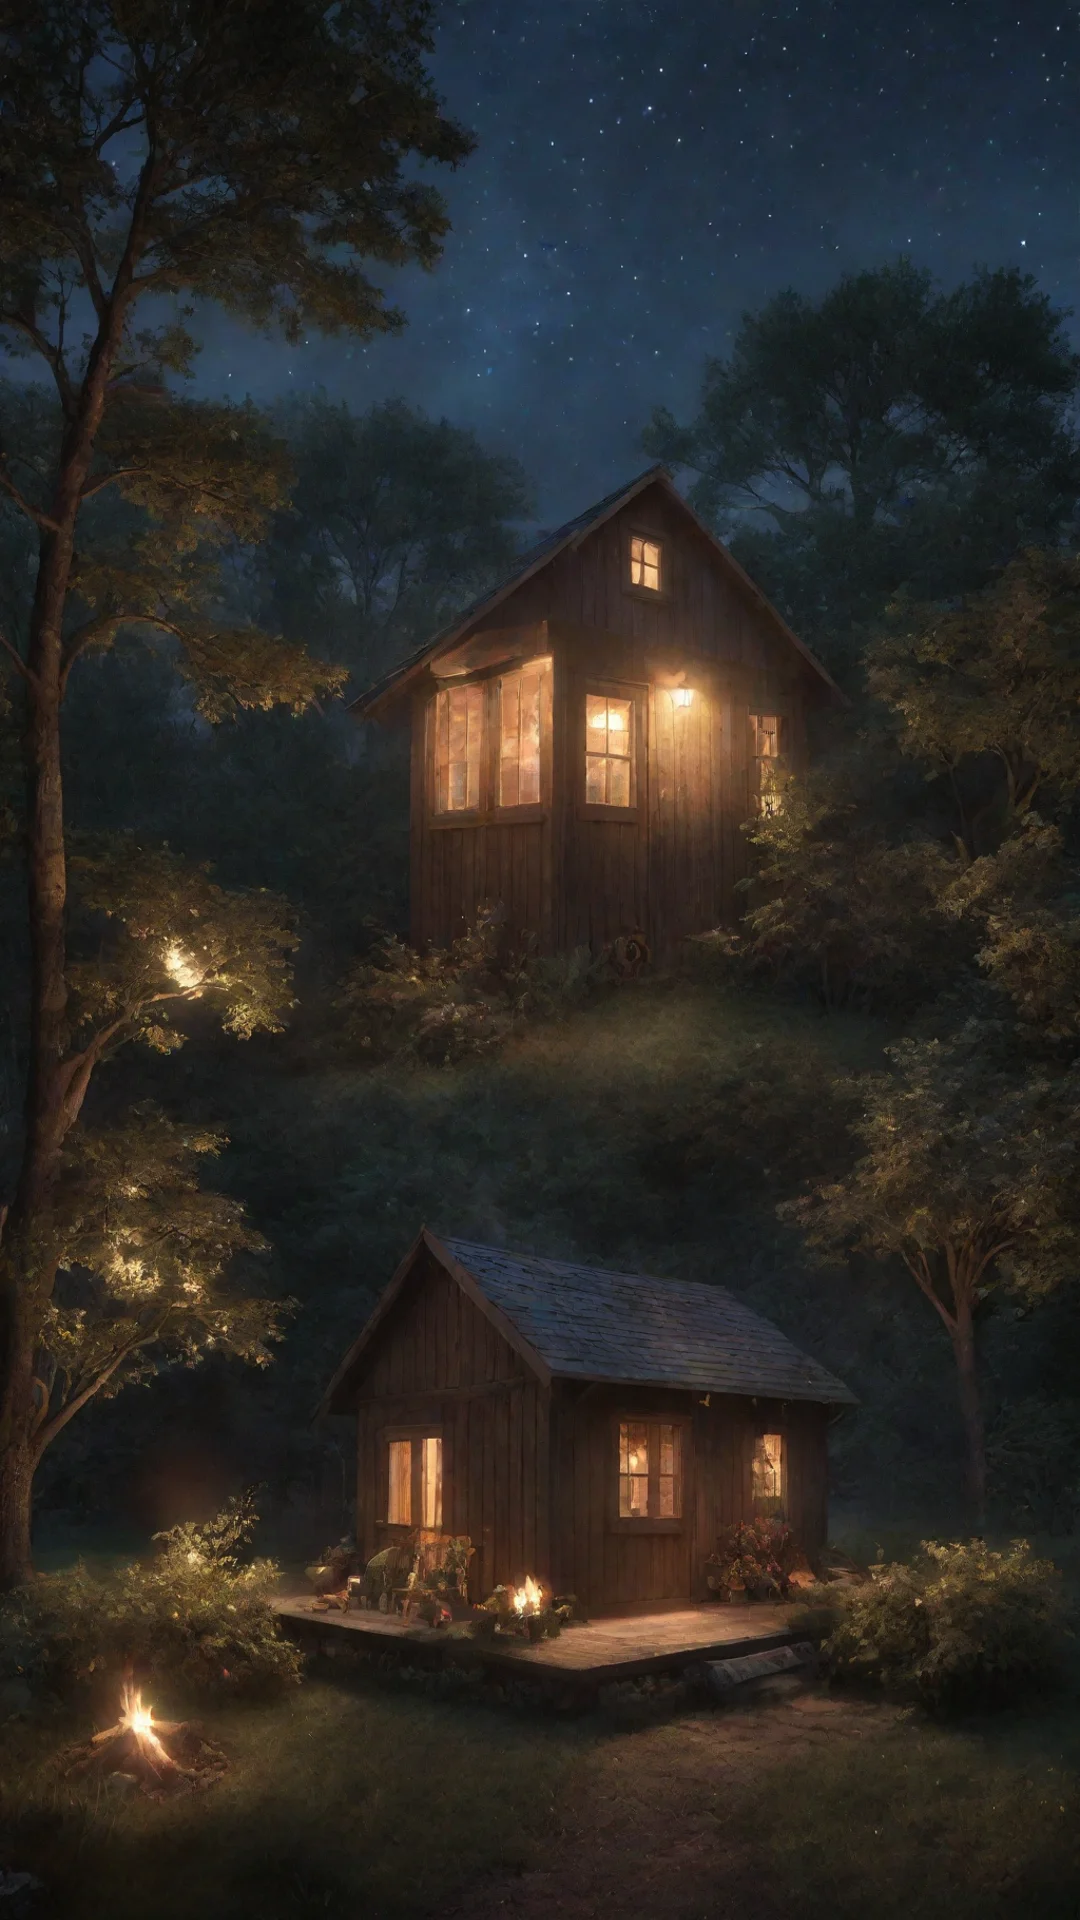 aiamazing night time shed with stars and trees with a warm glow from the windows and a smoking fire. magical and hyper realistic awesome portrait 2 tall